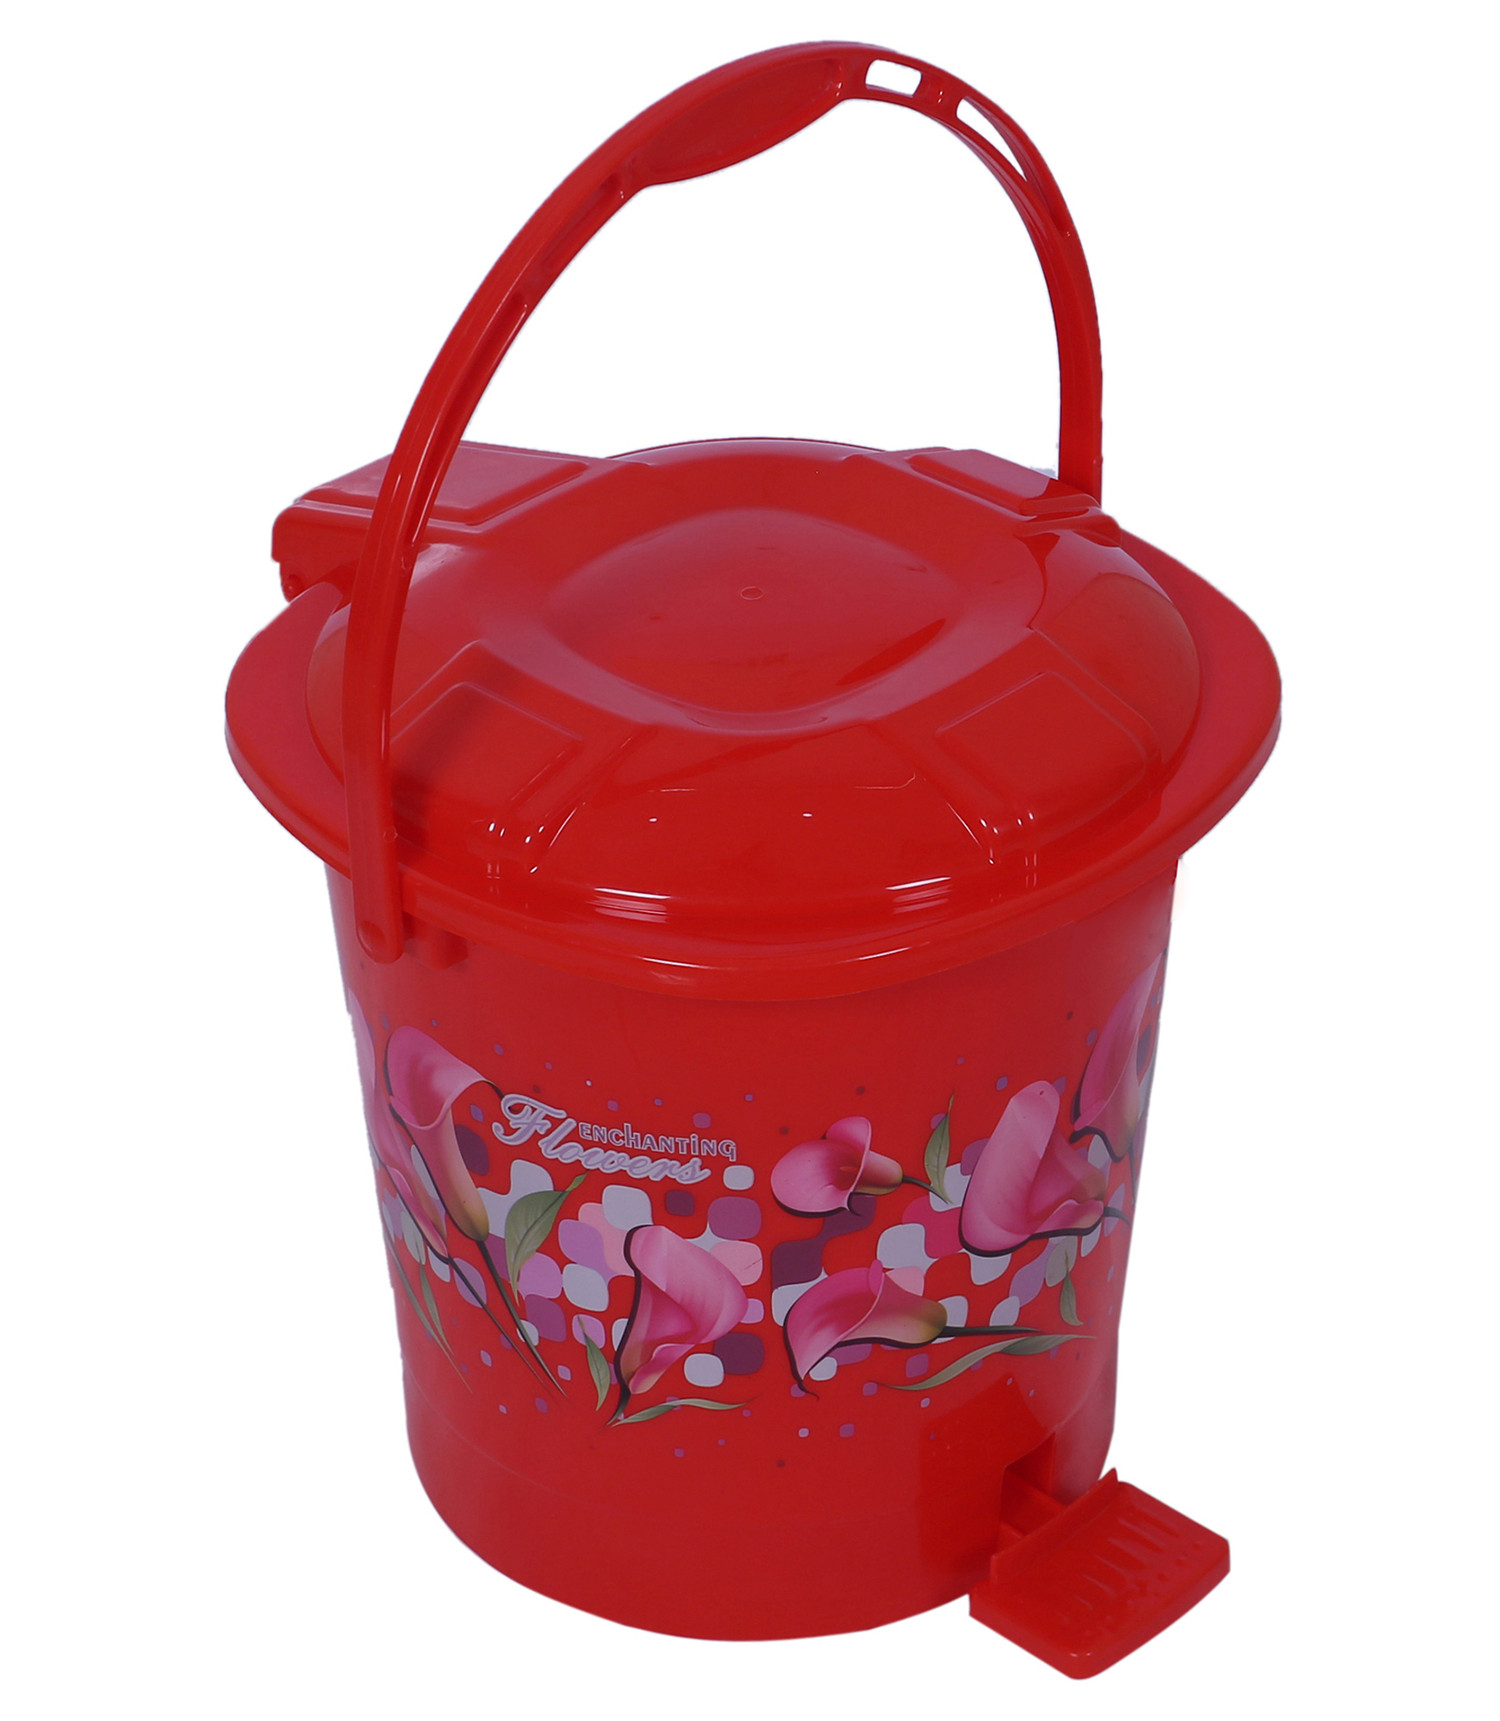 Kuber Industries Durable Floral Print Plastic Pedal Dustbin|Waste Bin|Trash Can For Kitchen & Home With Handle,10 Litre (Red)